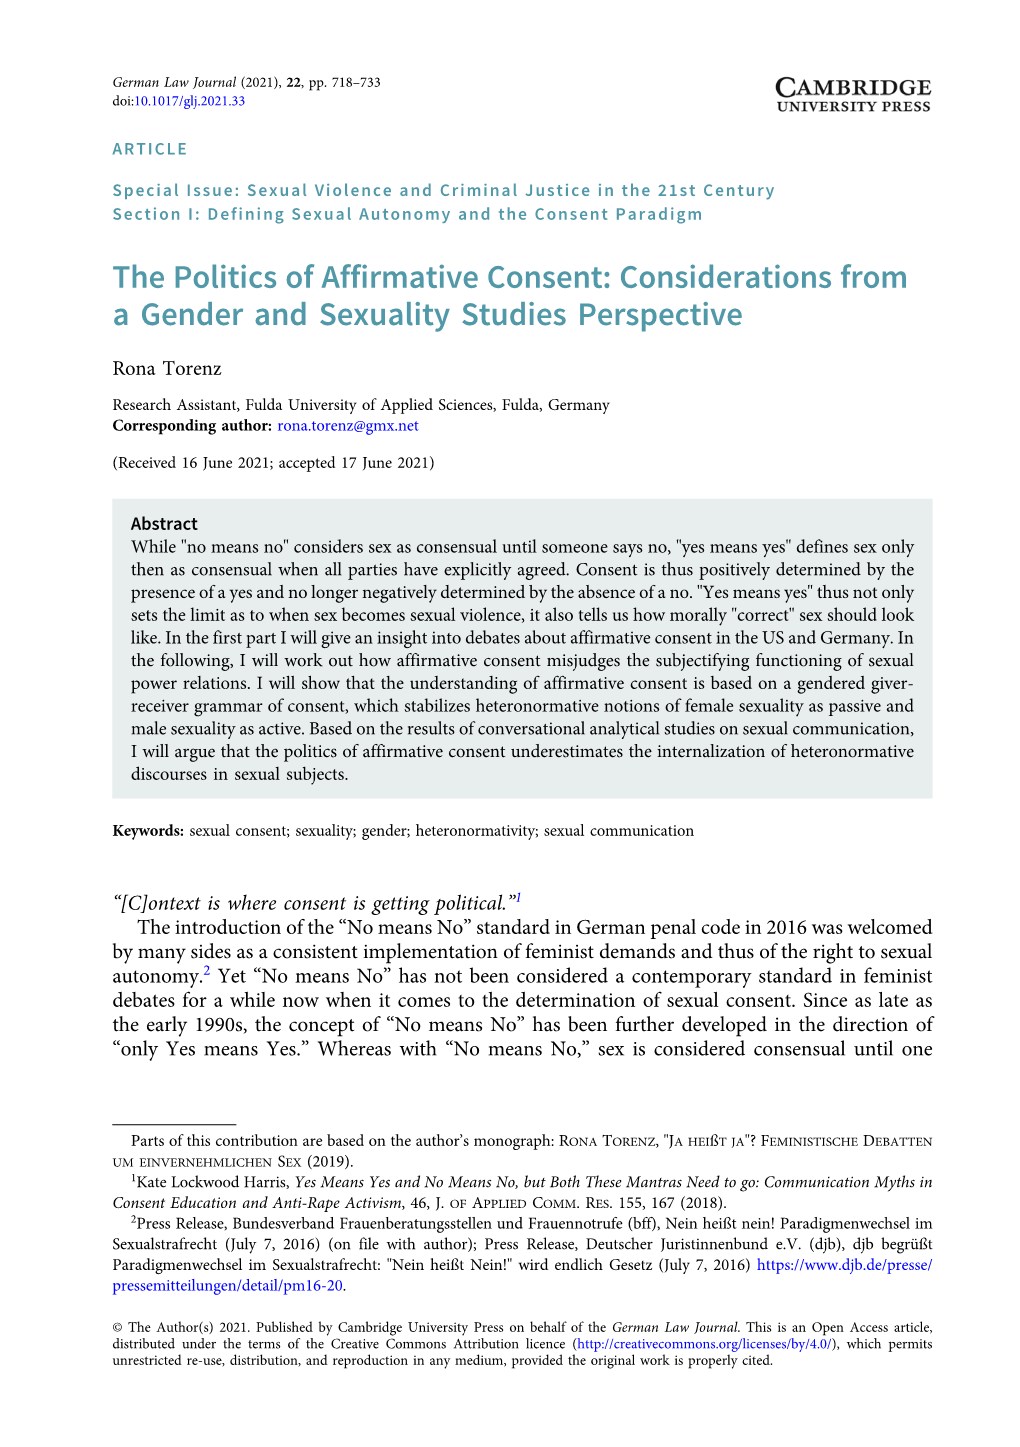 The Politics of Affirmative Consent: Considerations from a Gender and Sexuality Studies Perspective